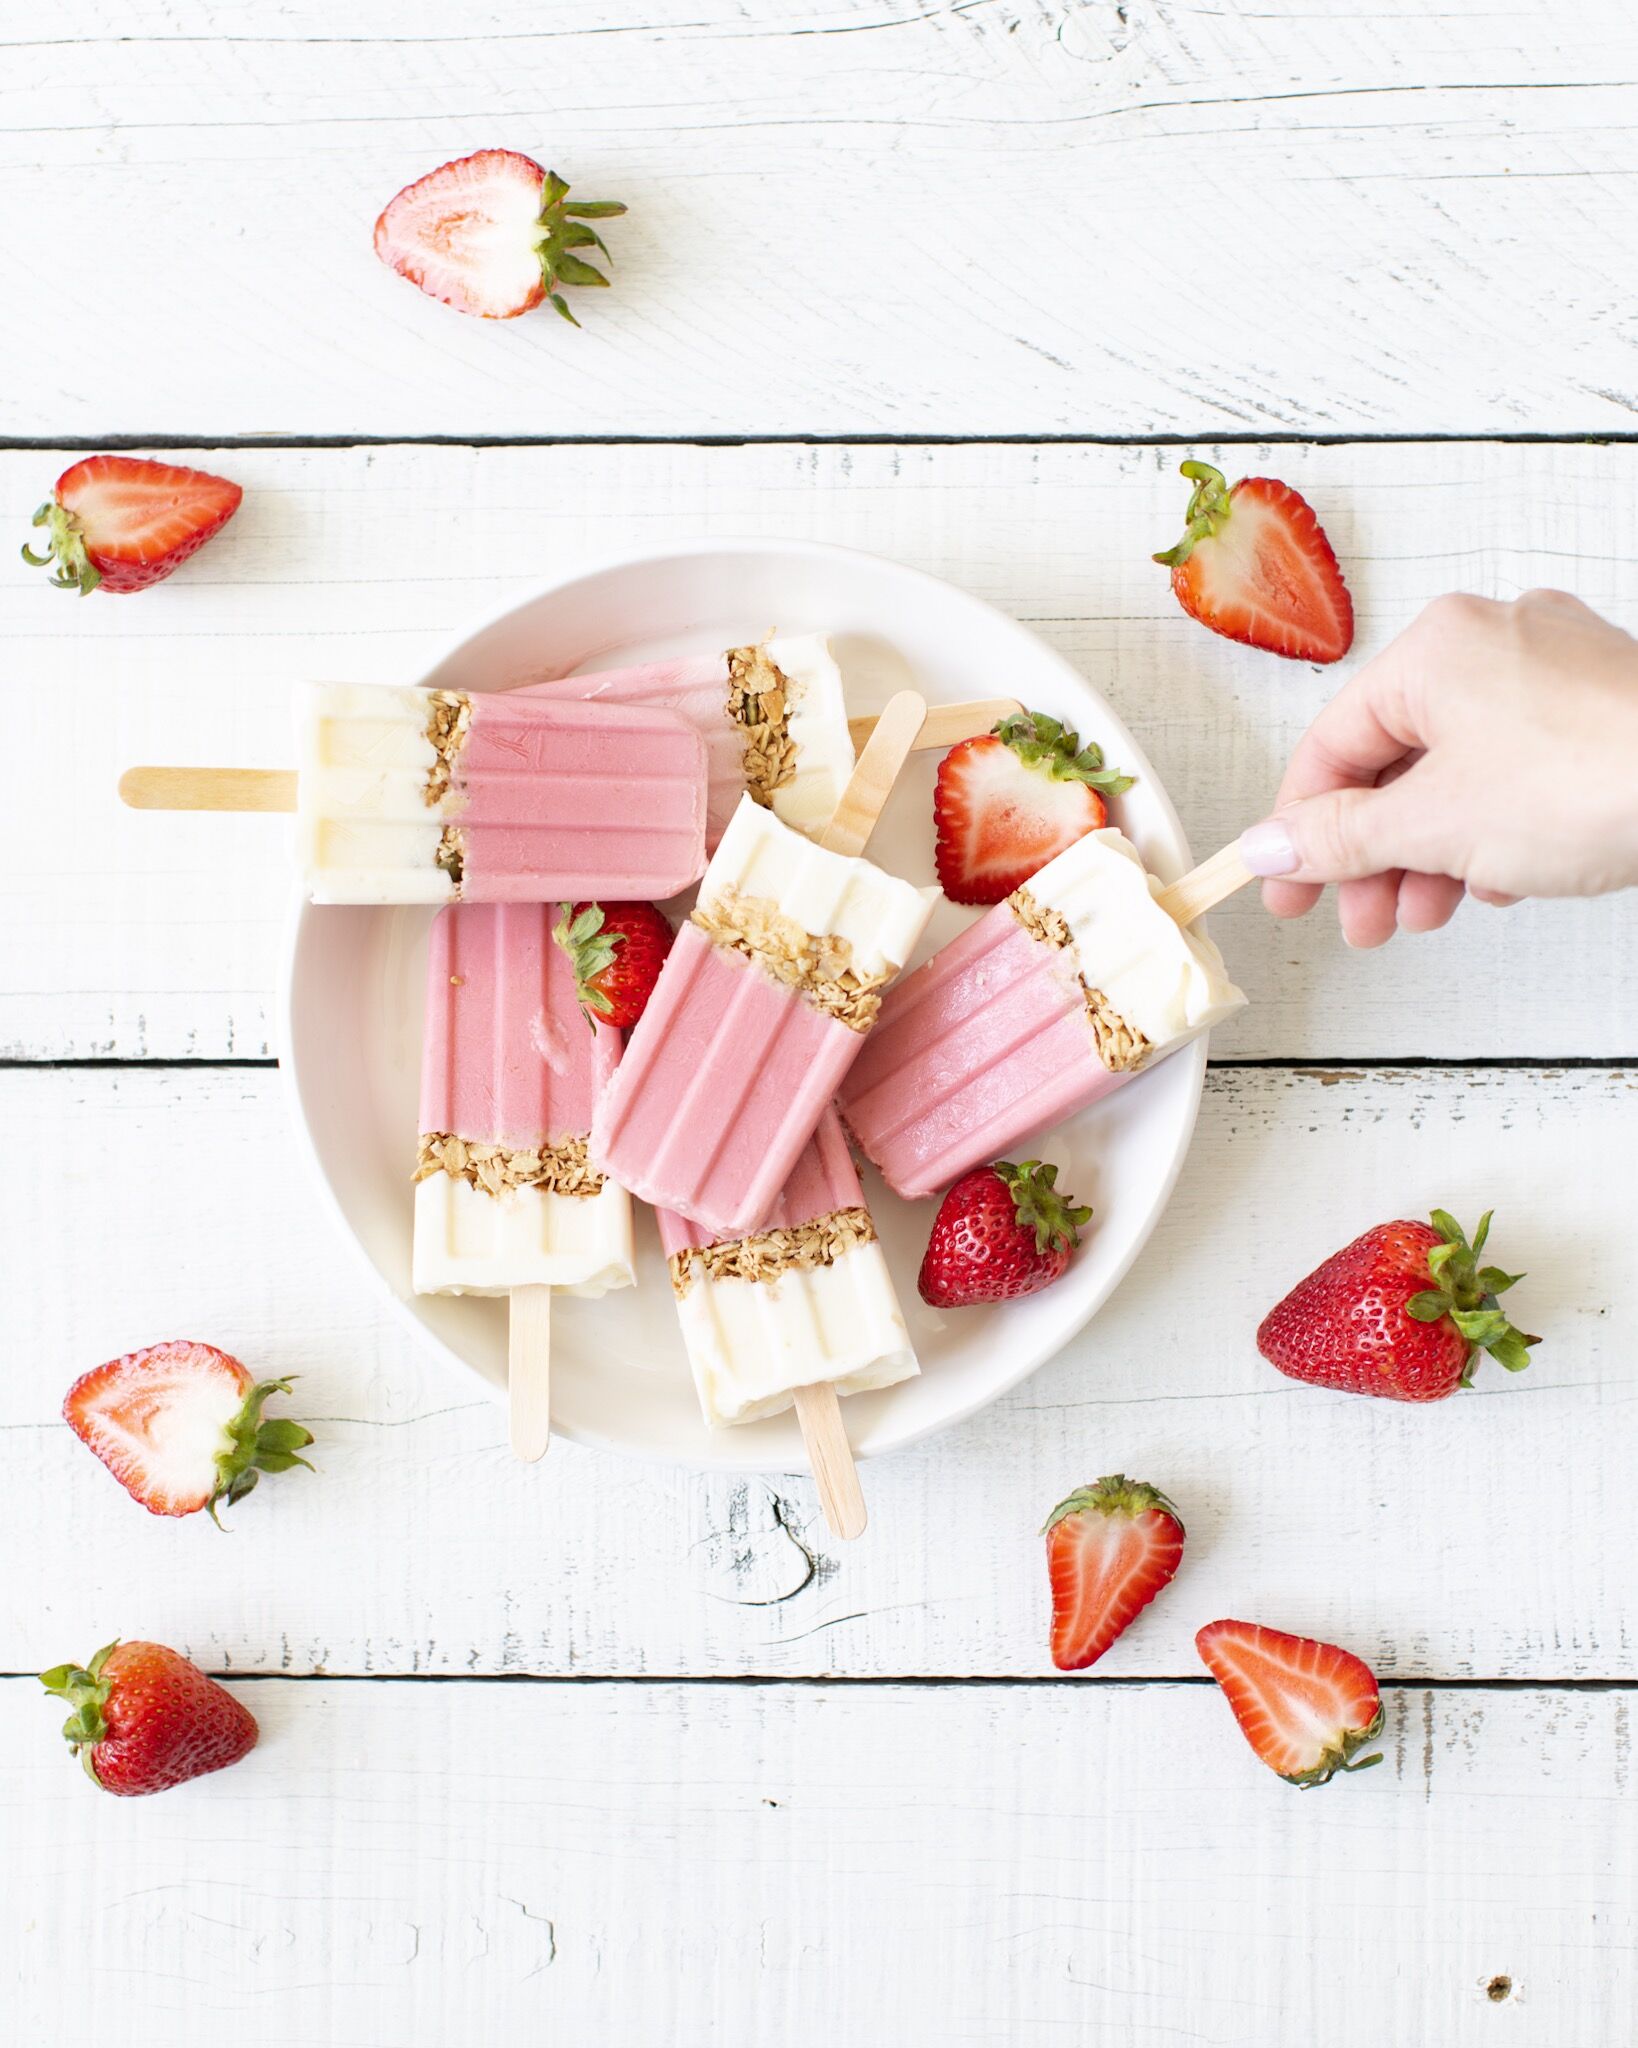 Strawberry Breakfast Popsicles - such a healthy fun way to eat breakfast that the kids will LOVE!